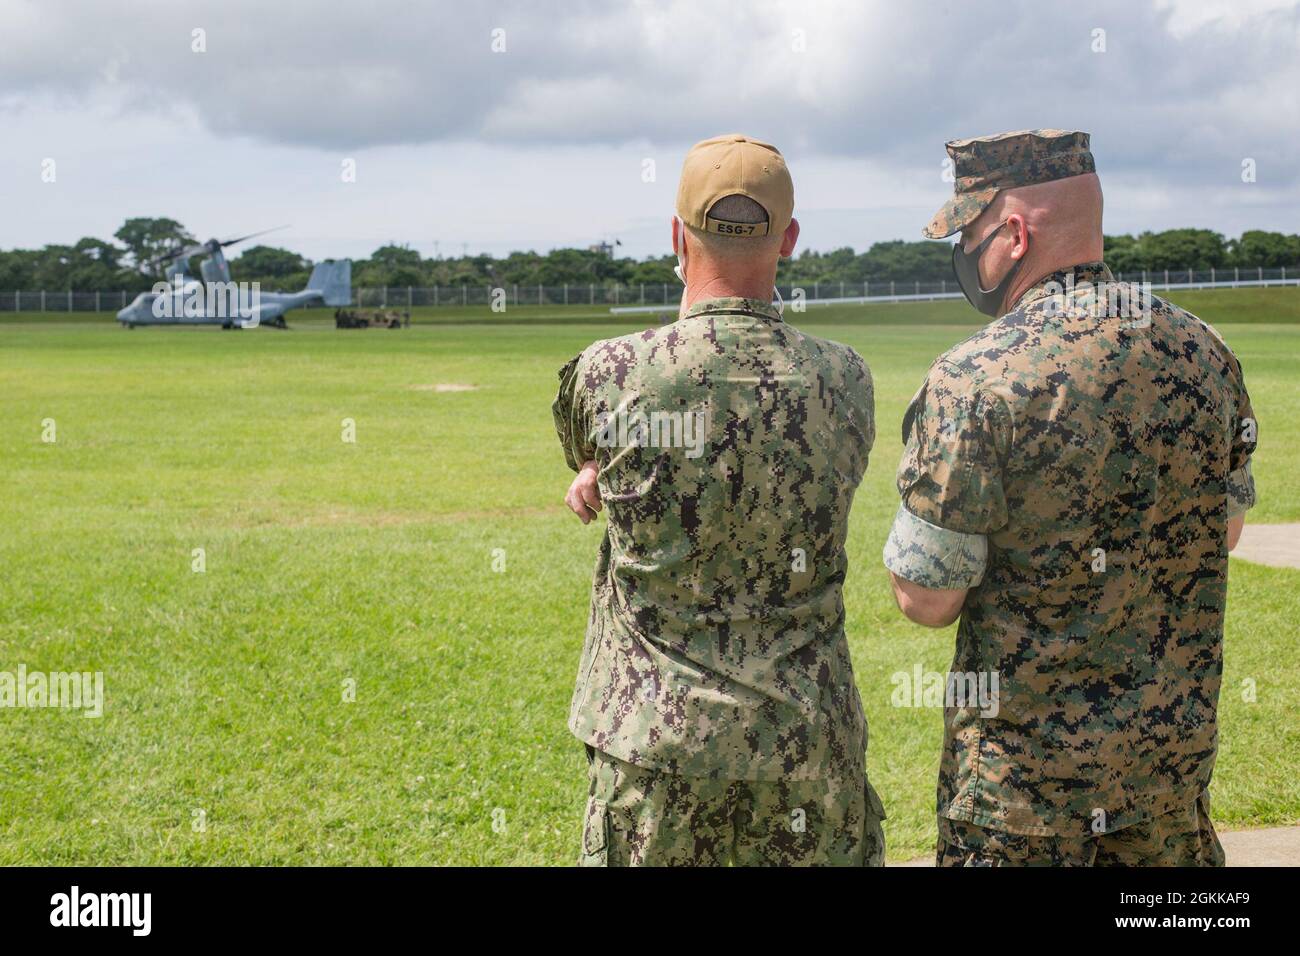 U.S. Navy Rear Adm. Chris Engdahl, commander of Expeditionary Strike Group (ESG) 7, Task Force (CTF) 76, meets with U.S Marine Corps Col. Michael Nakonieczny, commander of 31st Marine Expeditionary Unit (MEU), on Camp Hansen, Okinawa, Japan, May 14, 2020. The 31st MEU, the Marine Corps’ only continuously forward-deployed MEU, provides a flexible and lethal force ready to perform a wide range of military operations as the premier crisis response force in the Indo-Pacific region. Stock Photo